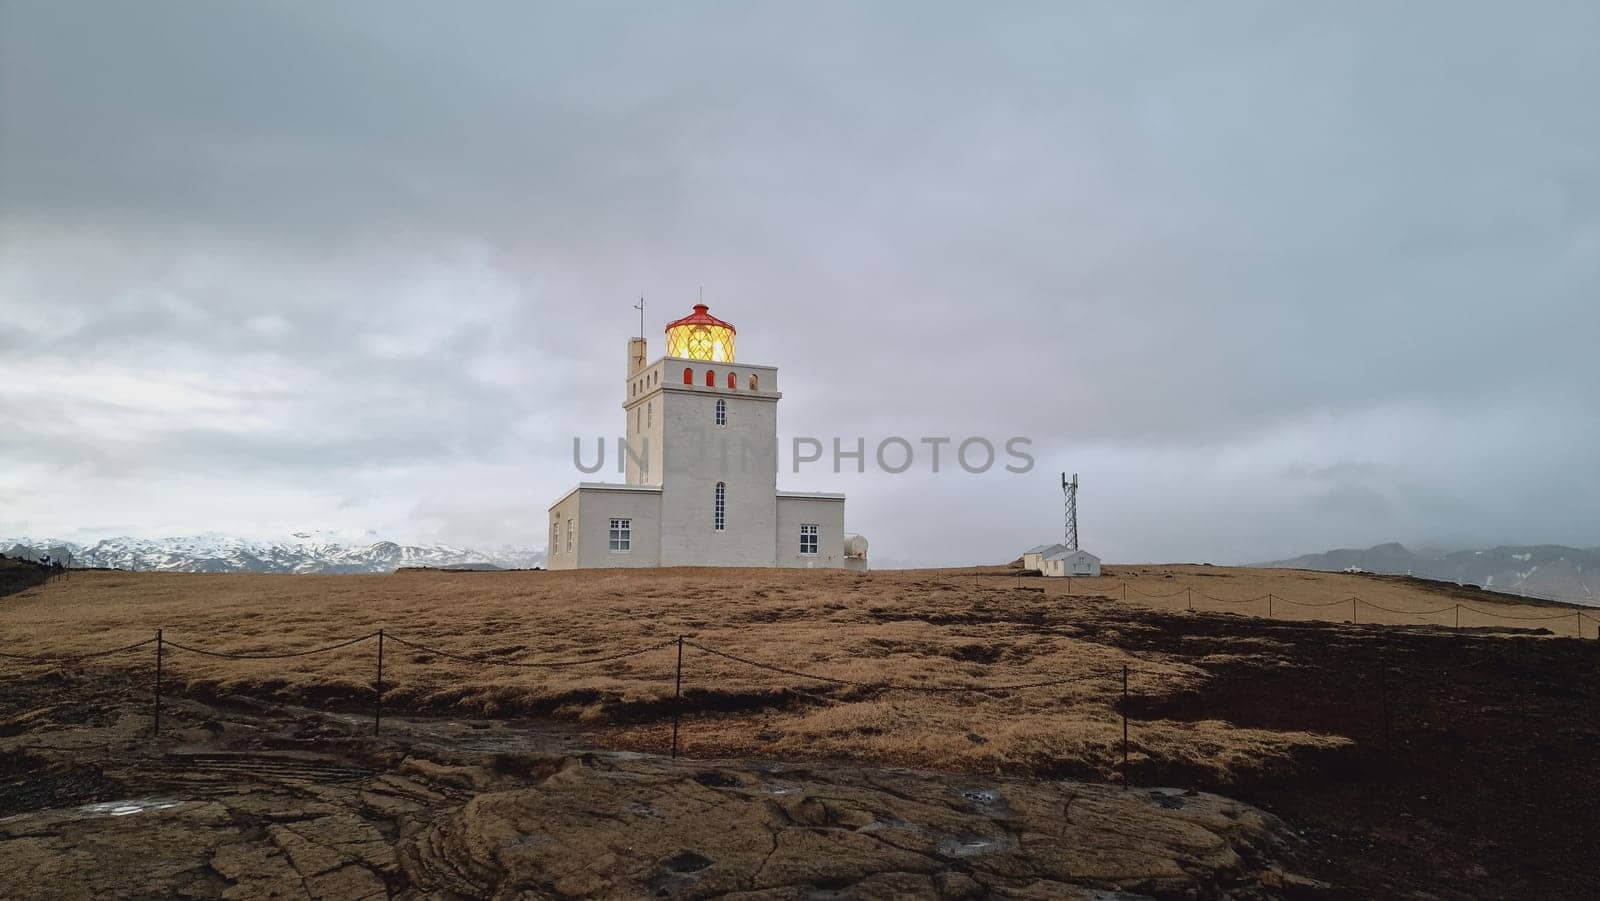 Dyrholaey beautiful lighthouse on icelandic peninsula with frozen fields and guidance building near ocean coastline. Amazing colorful tower used for navigation as beacon of light in iceland.